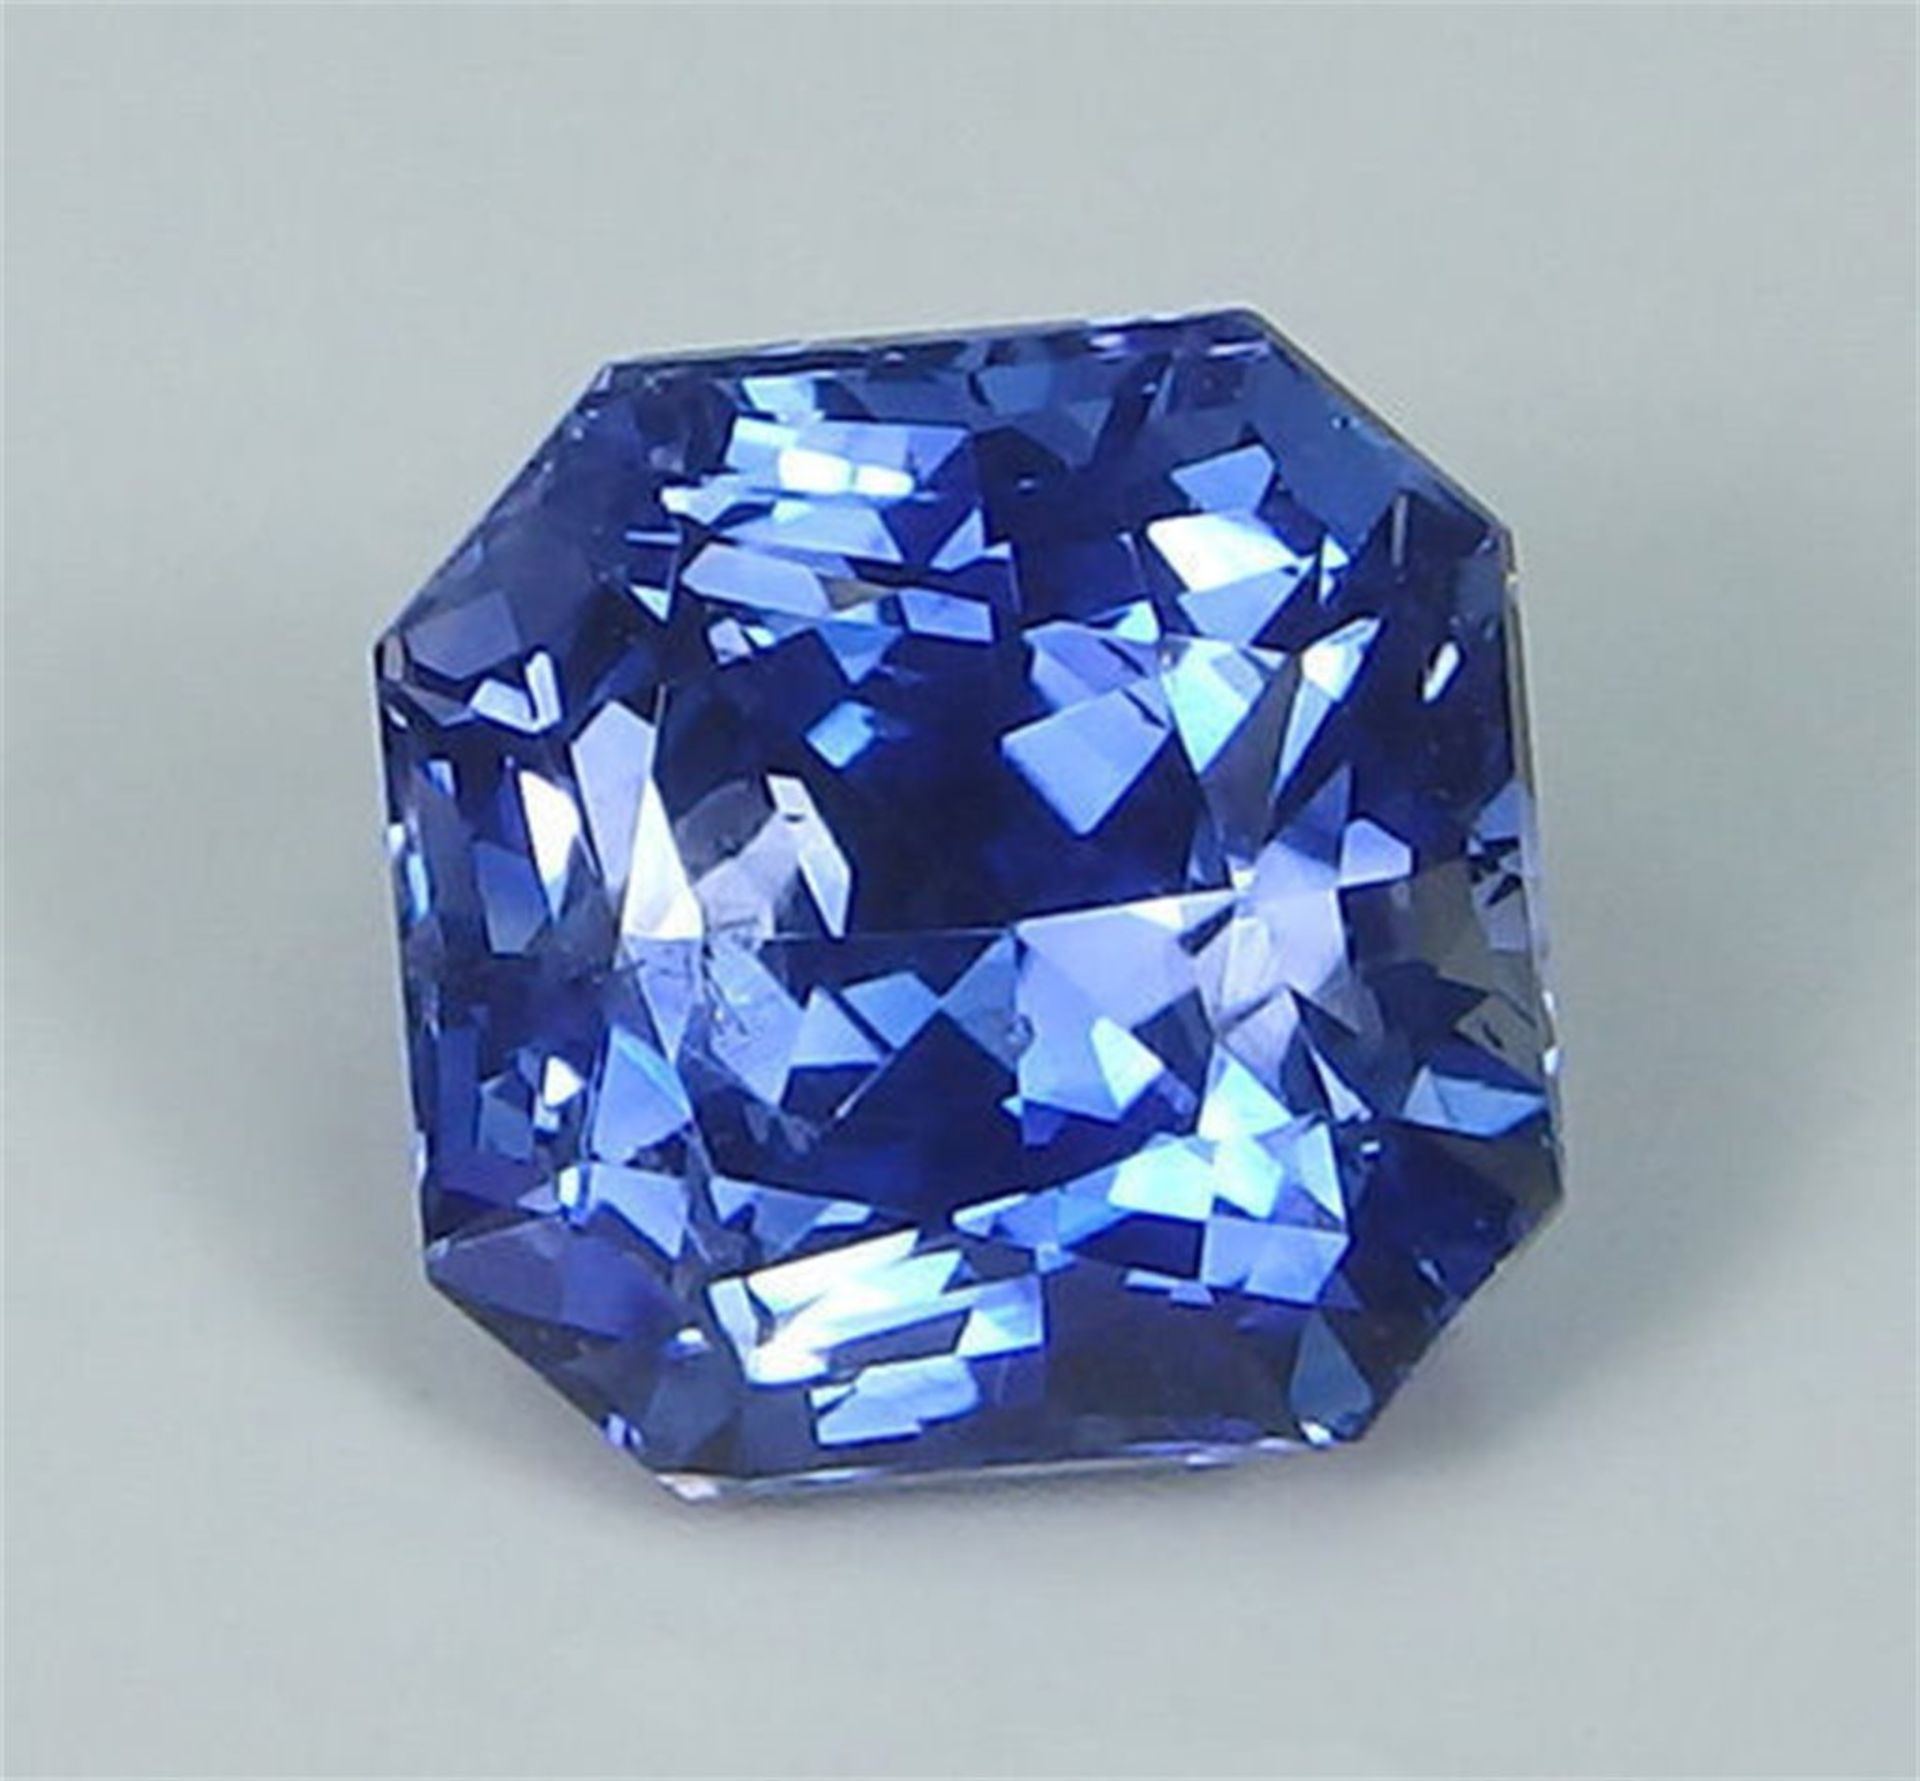 GIA Certified 3.51 ct. Untreated Blue Sapphire - BURMA - Image 3 of 7